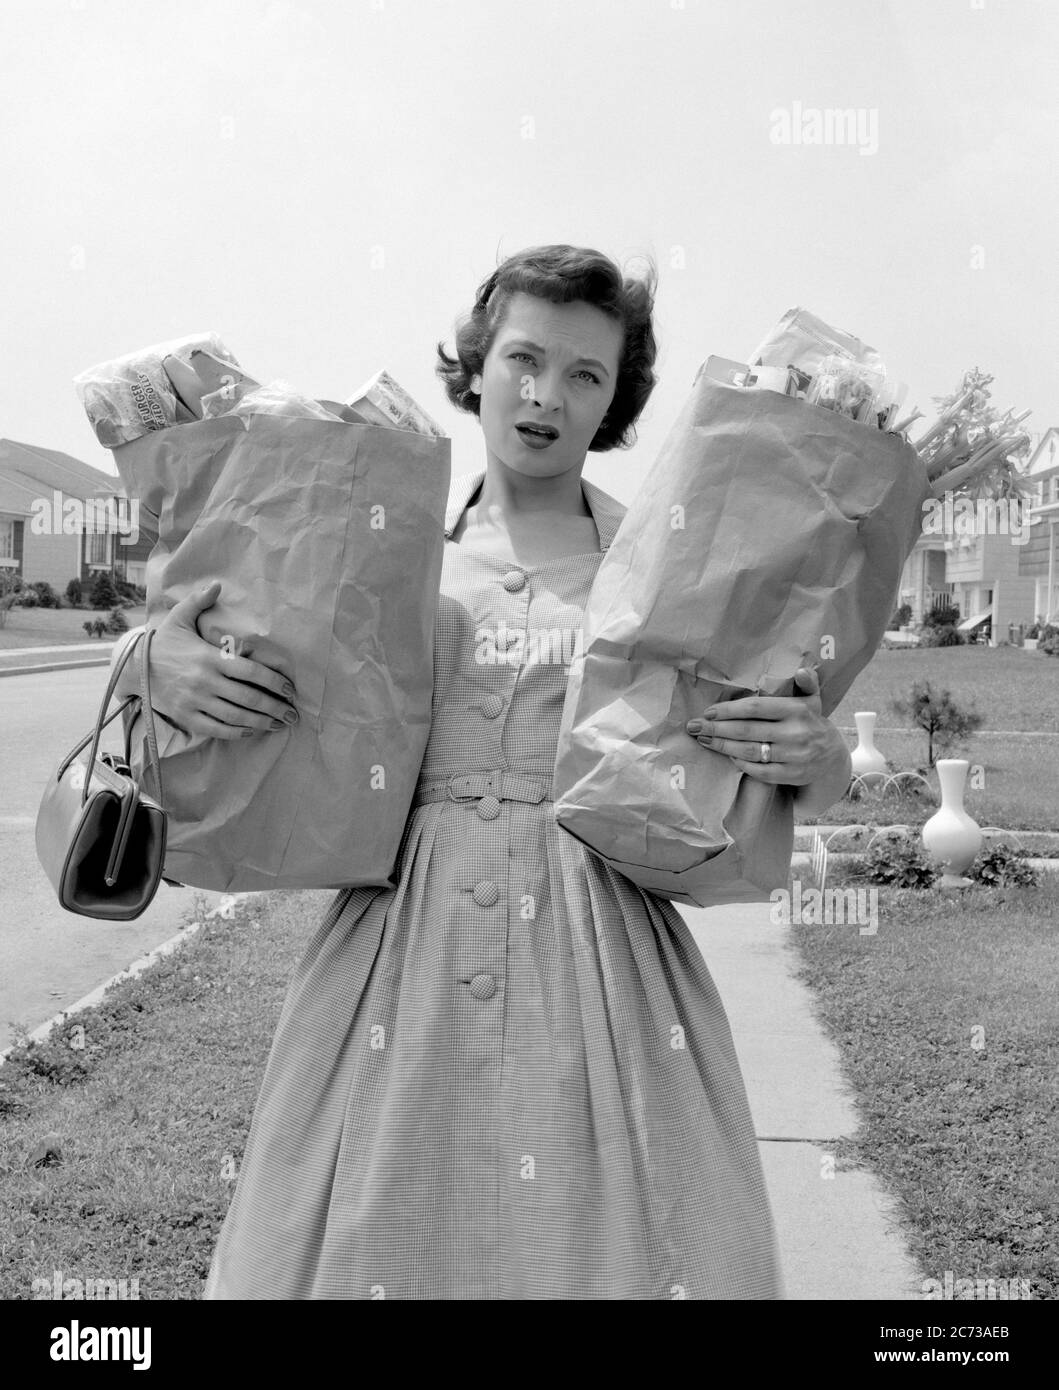 1950s WOMAN WORRIED ANXIOUS TIRED EXHAUSTED FACIAL EXPRESSION CARRYING HOLDING TWO BROWN PAPER BAGS FULL OF GROCERIES - s8671 DEB001 HARS NOSTALGIA OLD FASHION 1 ANGER FEAR COMMUNICATION YOUNG ADULT BALANCE SIGNAL WORRY CARRY BROWN LIFESTYLE ANNOYED FEMALES GROWNUP HOME LIFE COMMUNICATING COPY SPACE HALF-LENGTH LADIES PERSONS GROWN-UP HEAVY RISK CONTEMPLATING B&W SADNESS SHOPPER EYE CONTACT HOMEMAKER OVERWORKED SHOPPERS HOMEMAKERS NEIGHBORHOOD ANXIOUS DISTRESSED IRATE HOUSEWIVES PONDER PONDERING DEB001 DISPLEASURE HOSTILITY ANNOYANCE COMMUNICATE CONTEMPLATE EMOTION EMOTIONAL IRRITATED NEEDS Stock Photo